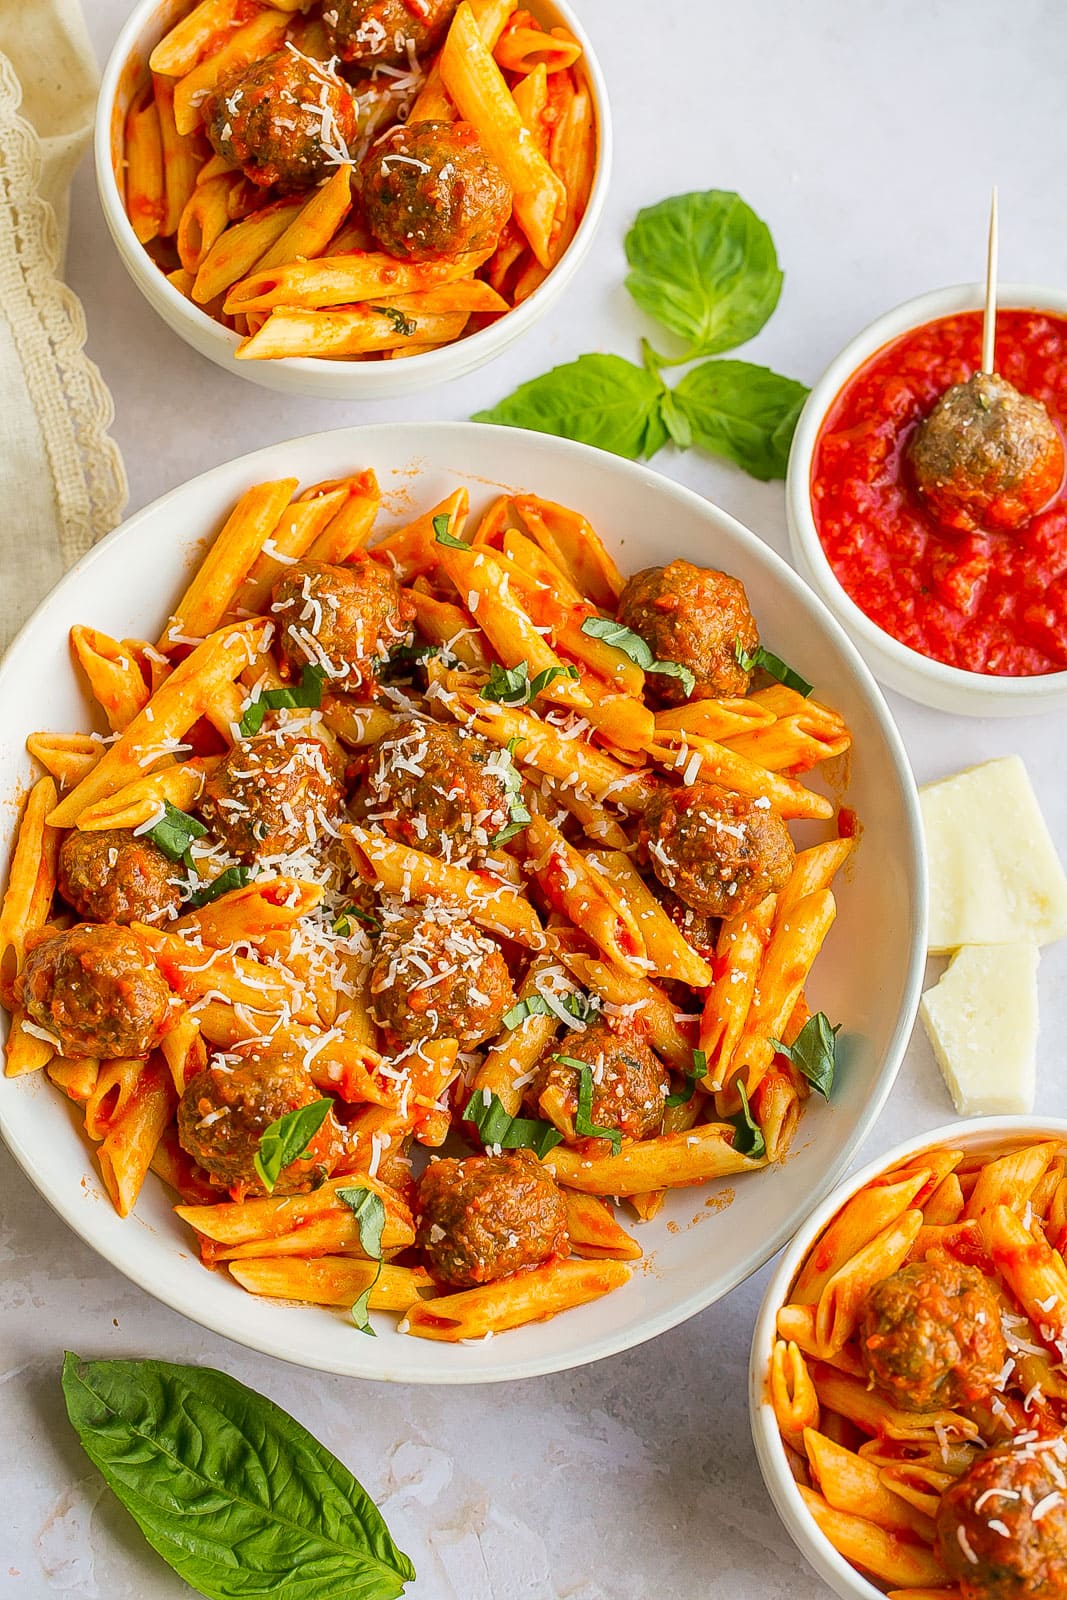 Large bowl of pasta and mini meatballs.